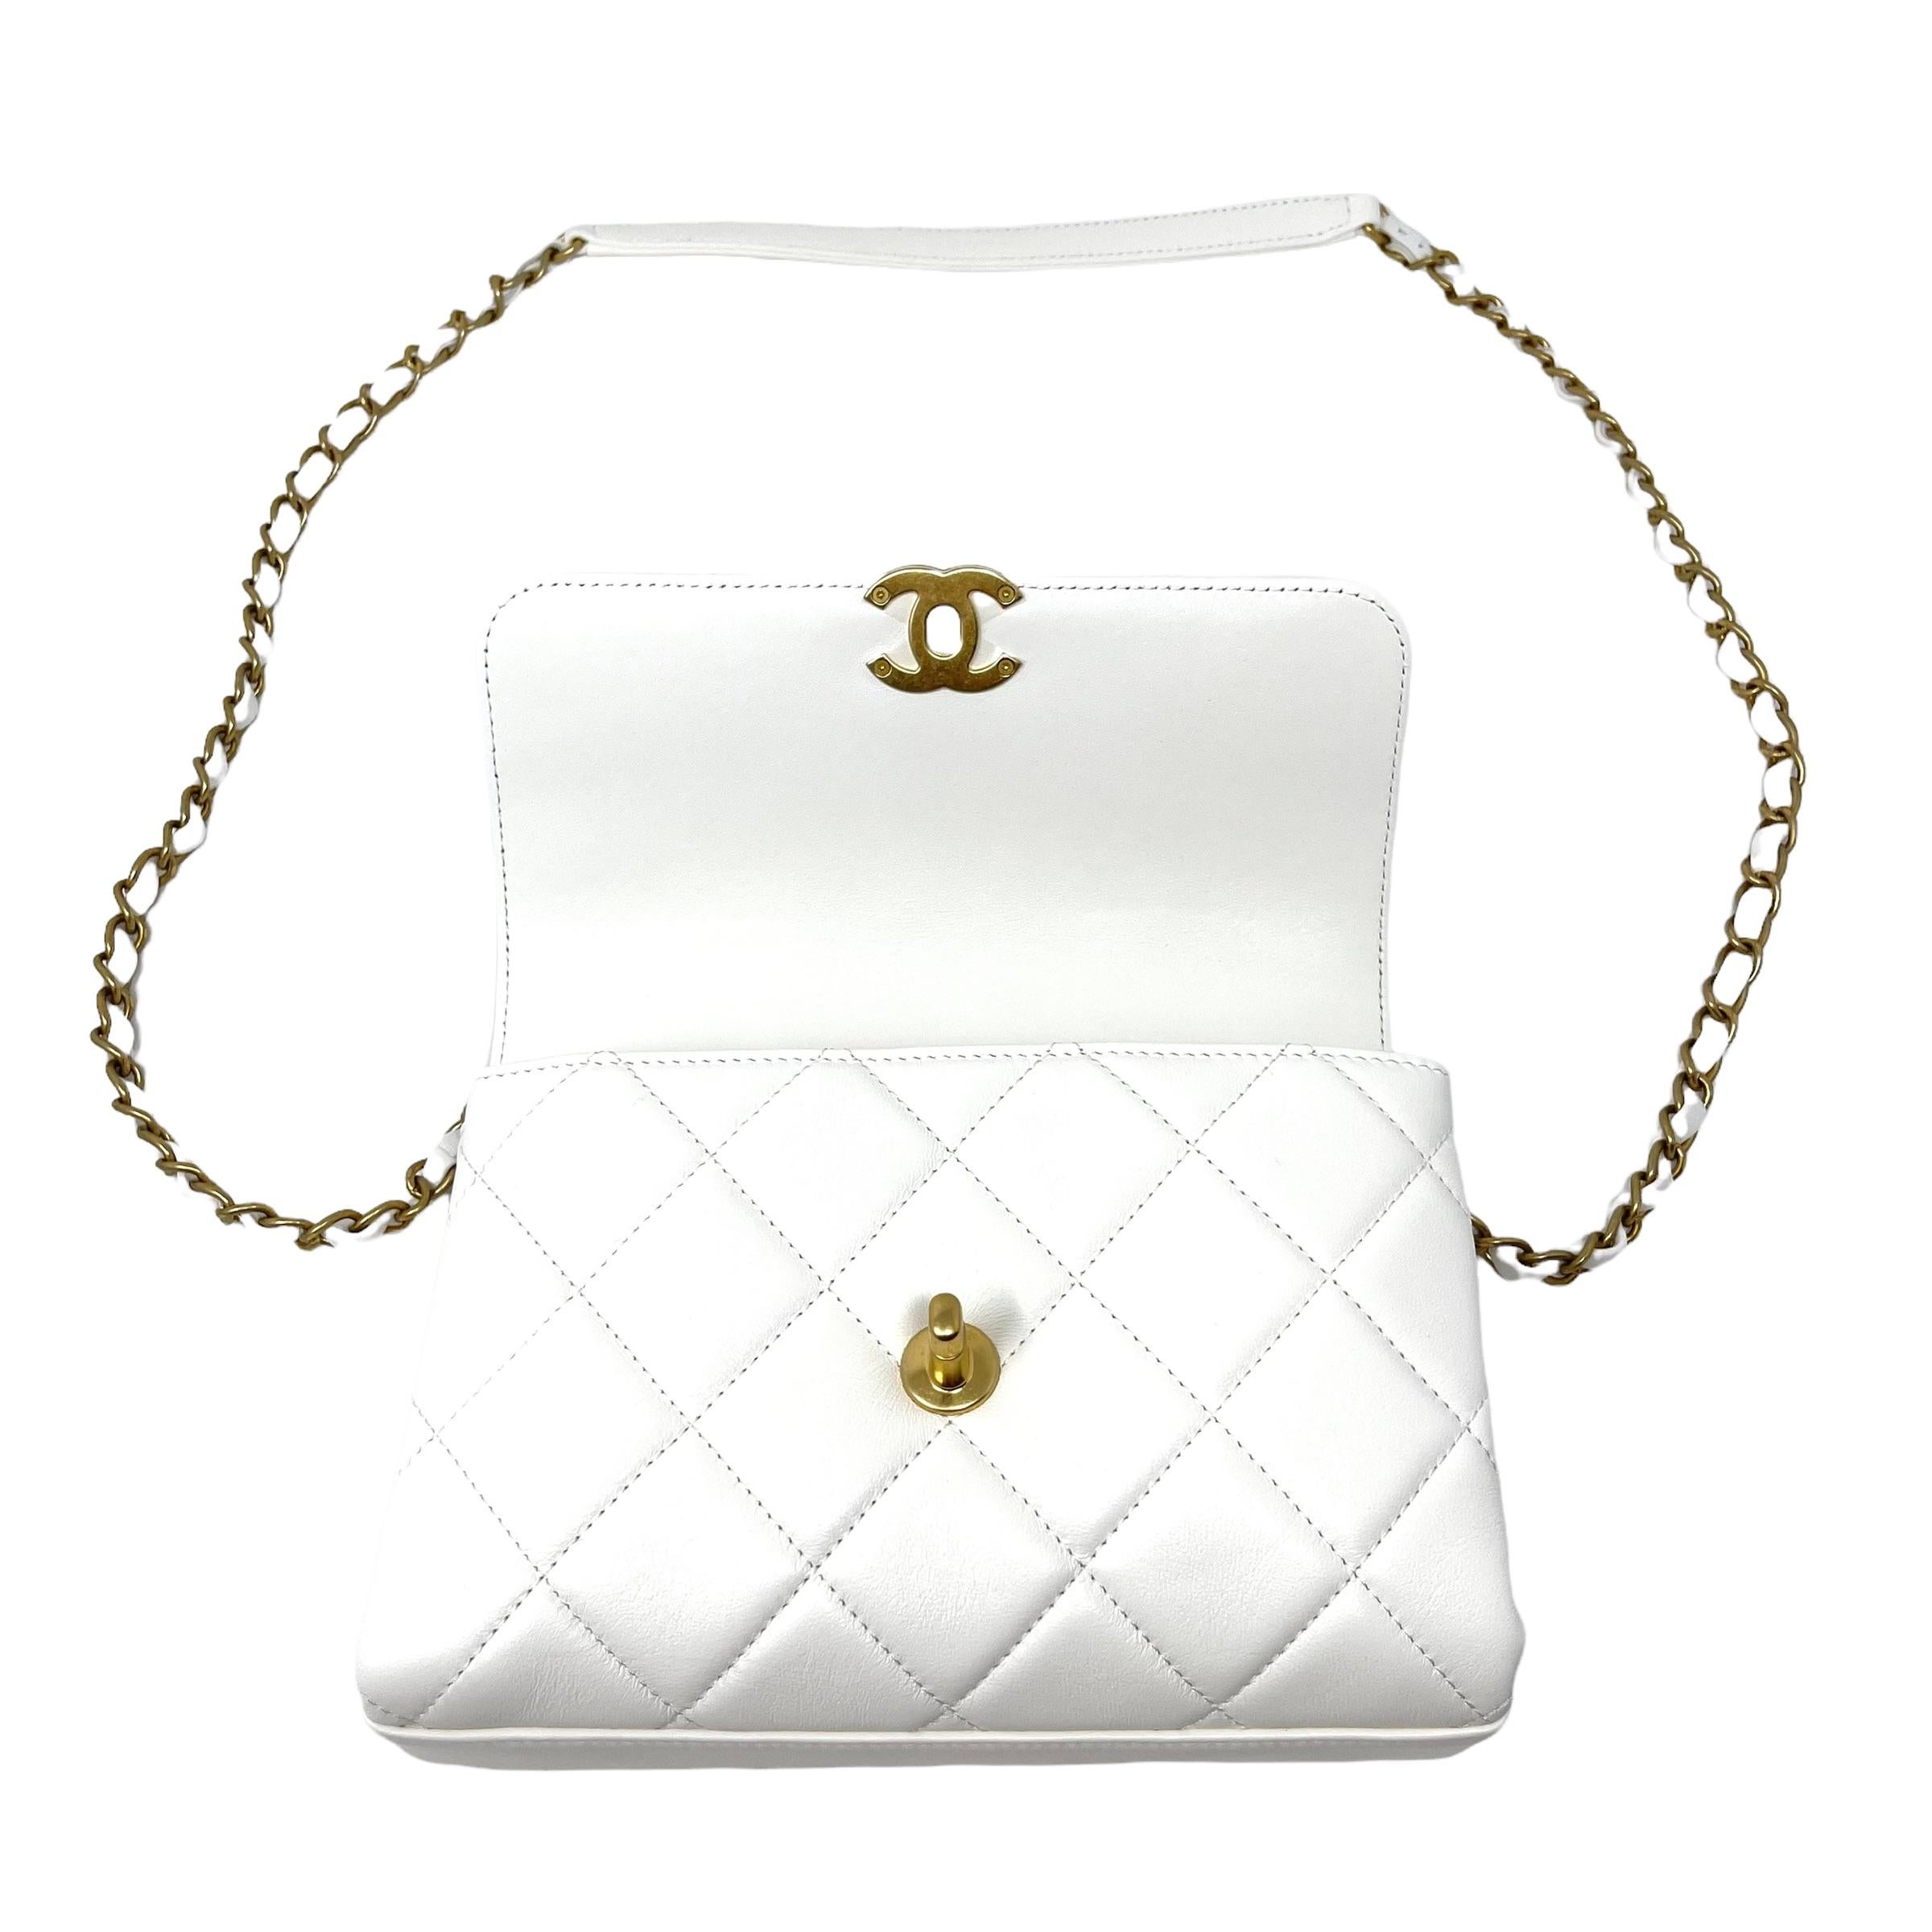 NEW Chanel White Small Flap Bag Quilted Leather Crossbody Bag For Sale 10